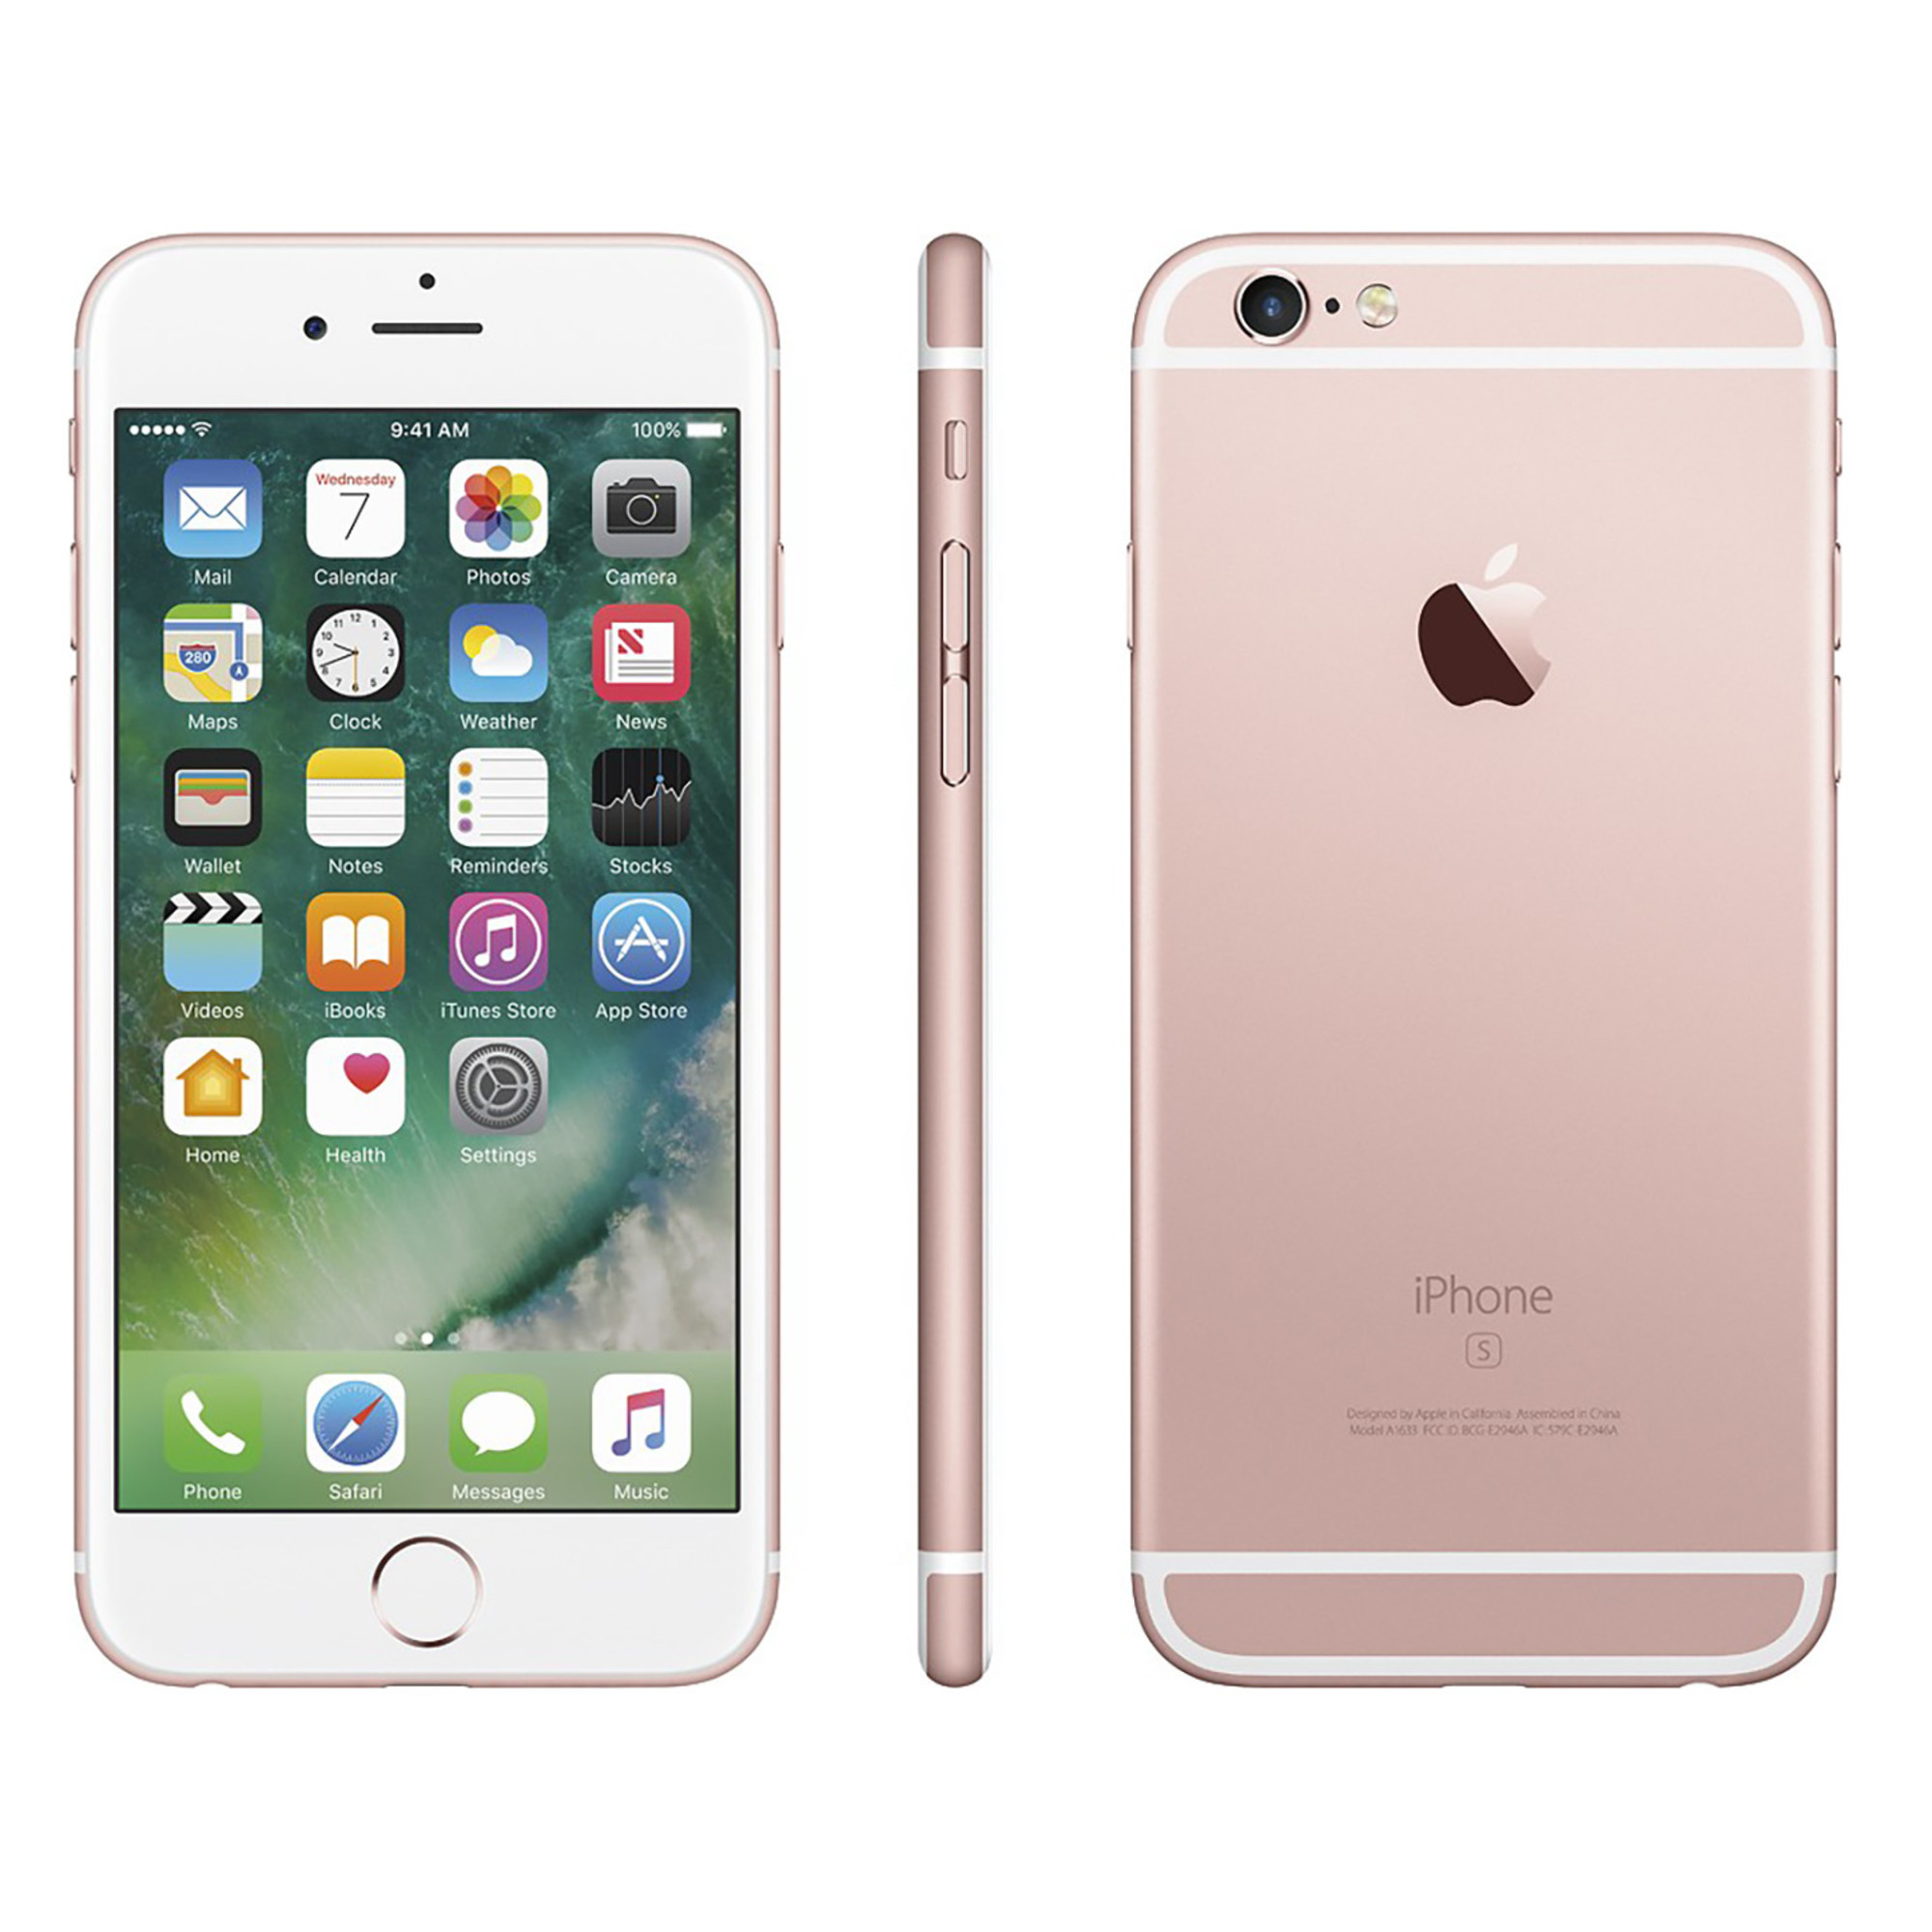 Apple iPhone 6s 16GB GSM Phone - Rose Gold (Used) + WeCare Alcohol Wipes Pack (50 Wipes) - image 4 of 6